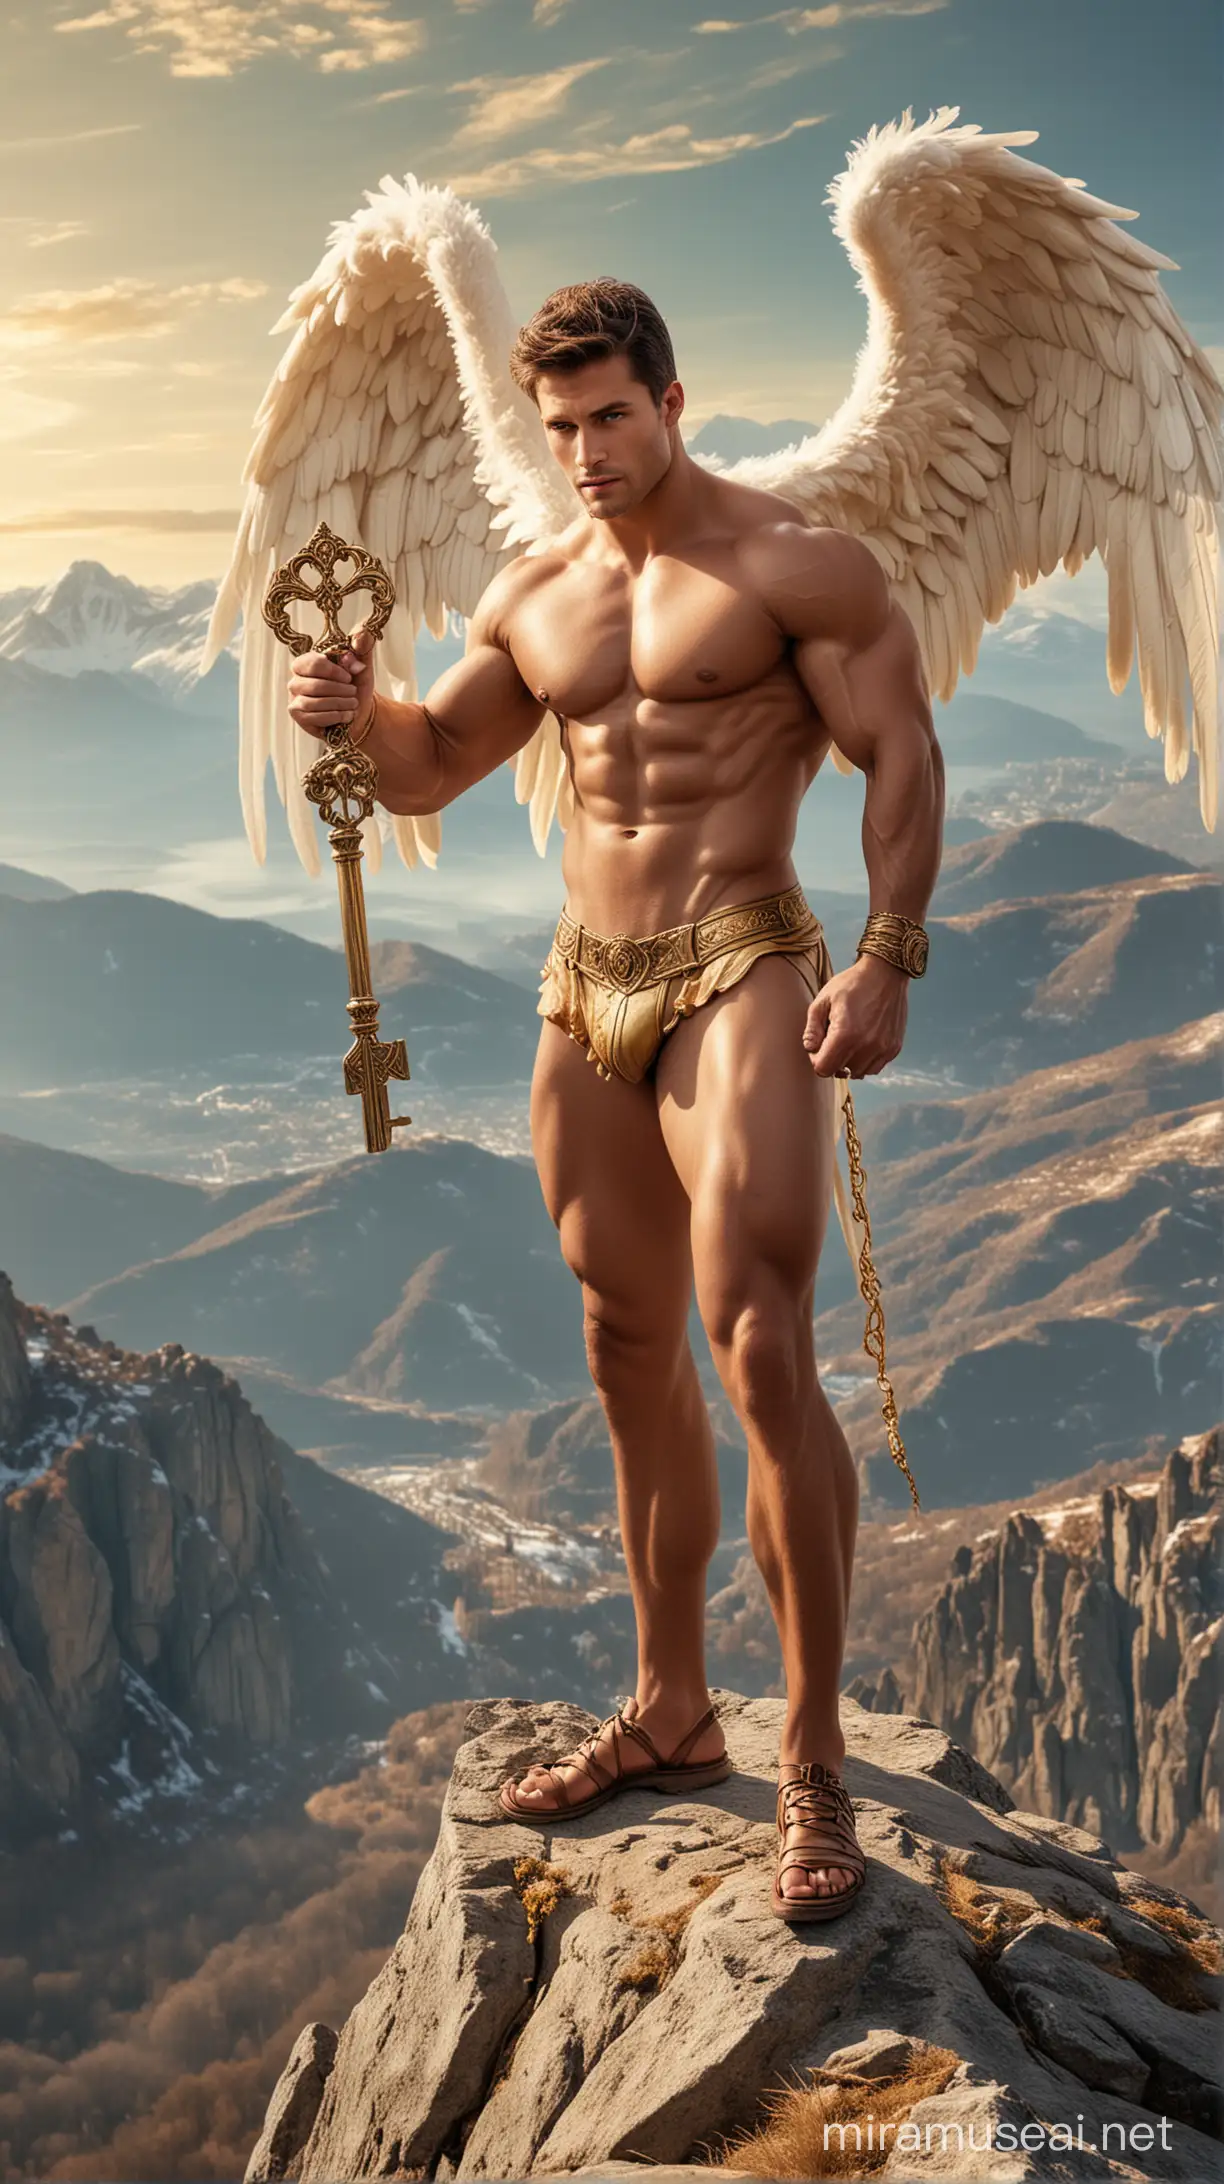 muscular male angel standing on top of a mountain peak. subject is holding a large golden key